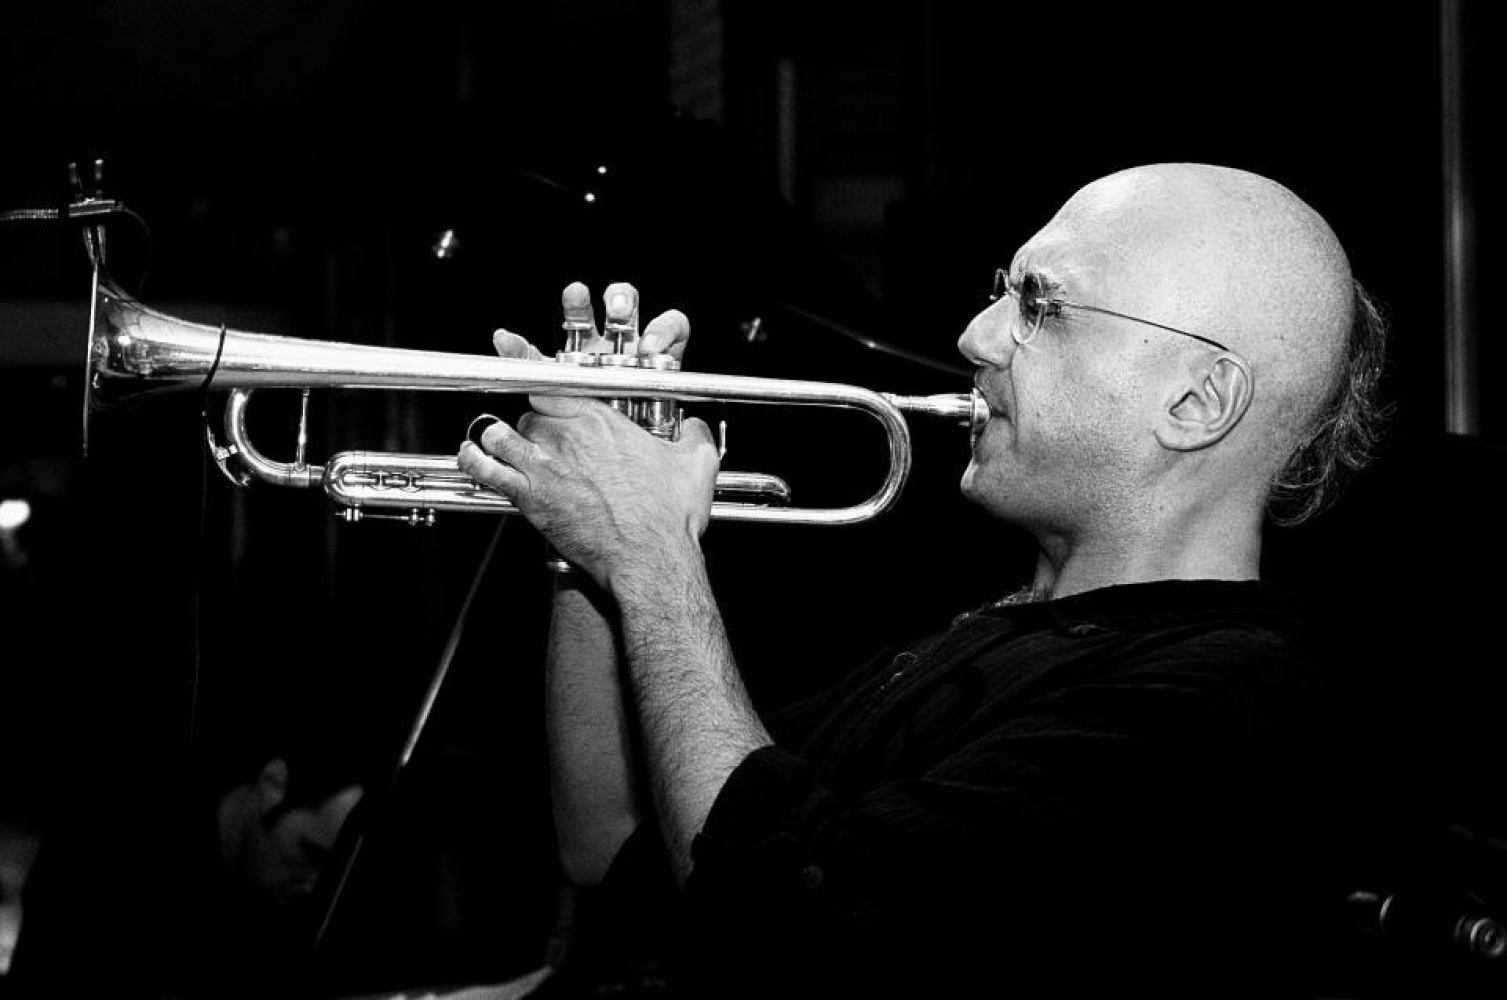 David Boato playing the trumpet